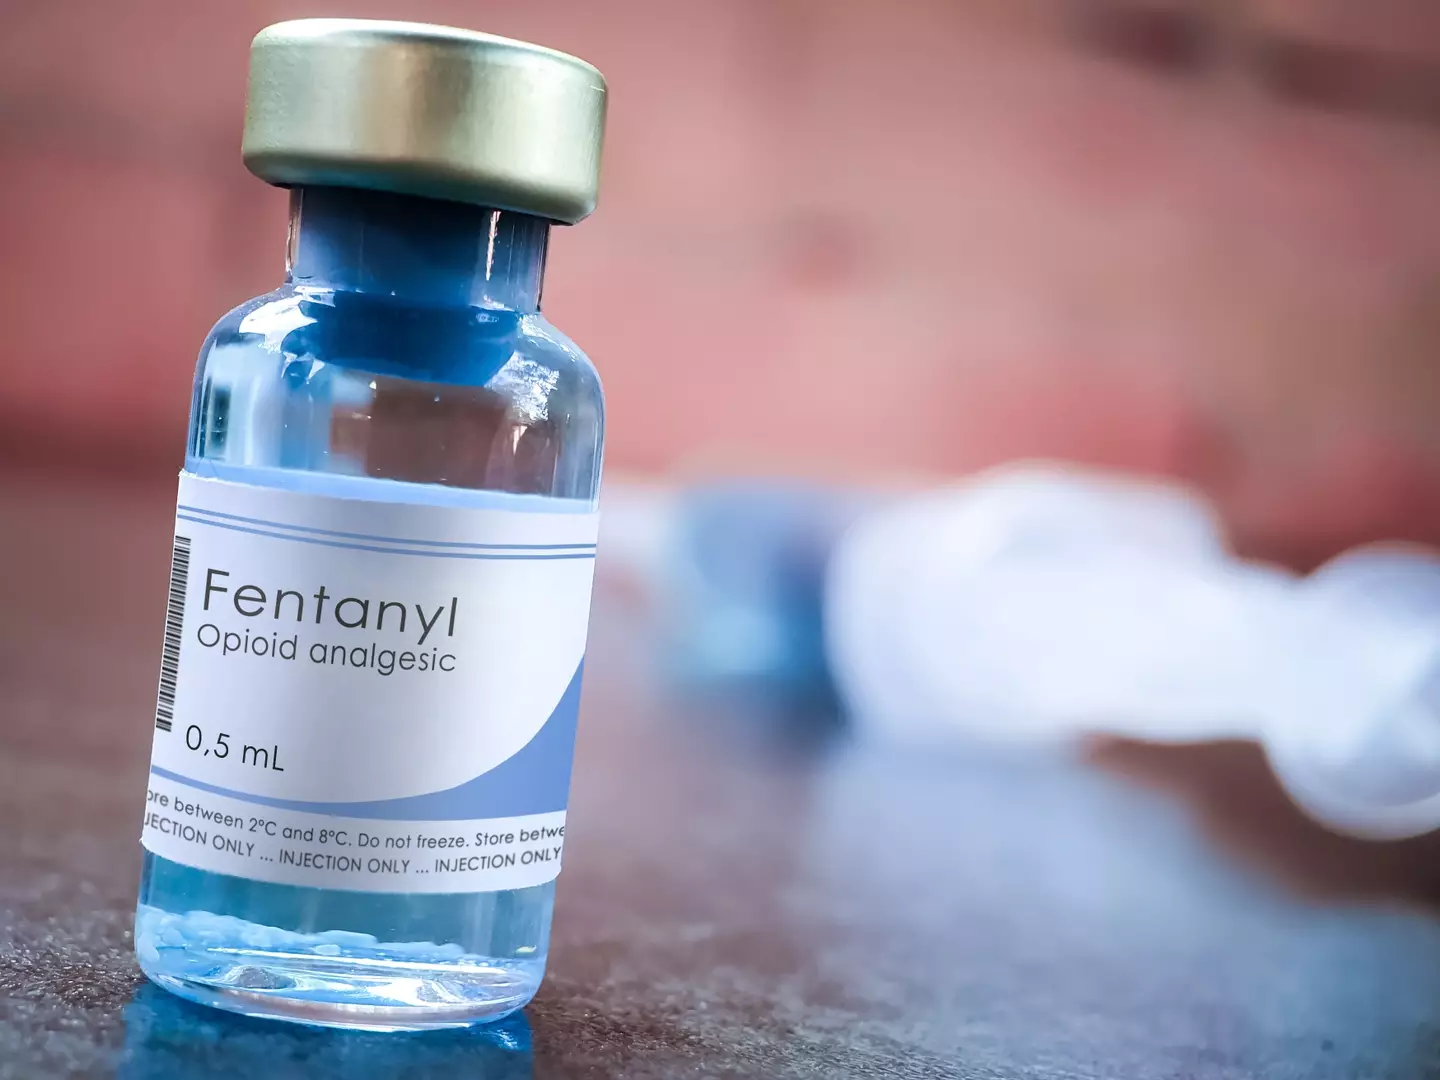 Fentanyl is a strong opioid painkiller.